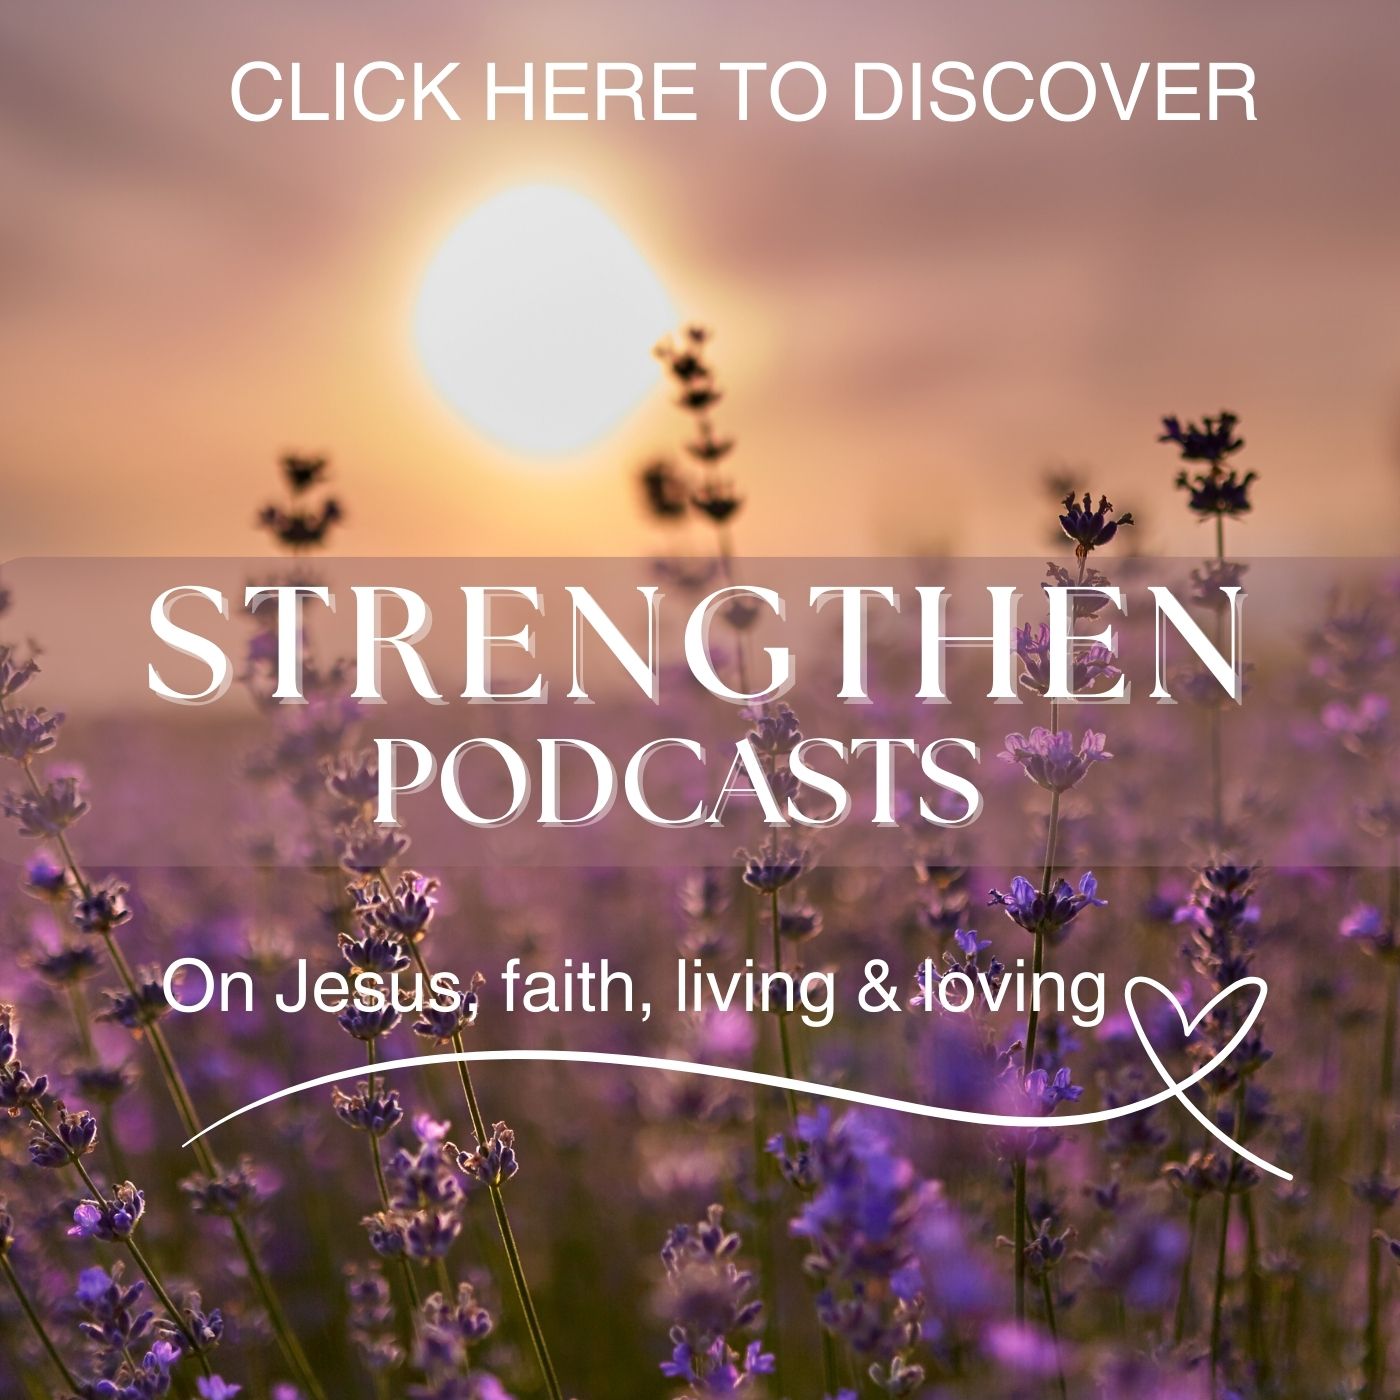 Click here to discover strengthen podcasts